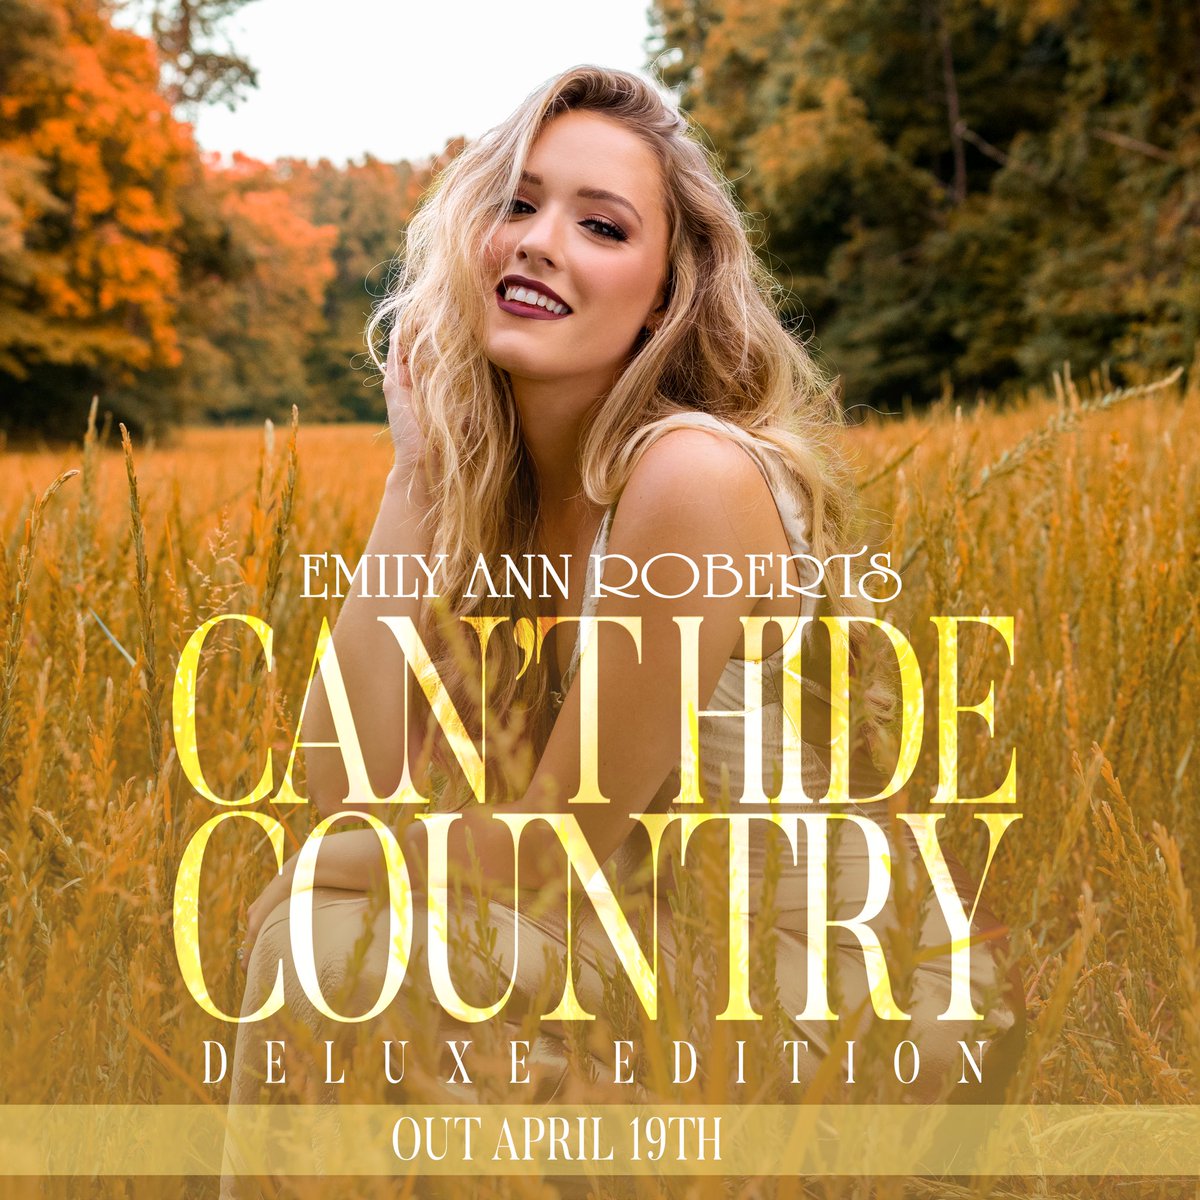 Can’t Hide Country is getting as country as it gets with the DELUXE EDITION!!! So excited to announce the “Can’t Hide Country” (Deluxe Edition) will be out April 19th!! Featuring THREE NEW SONGS including one of my favorites, “Back Home”. Pre-save/add now emilyannroberts.lnk.to/chc-deluxe